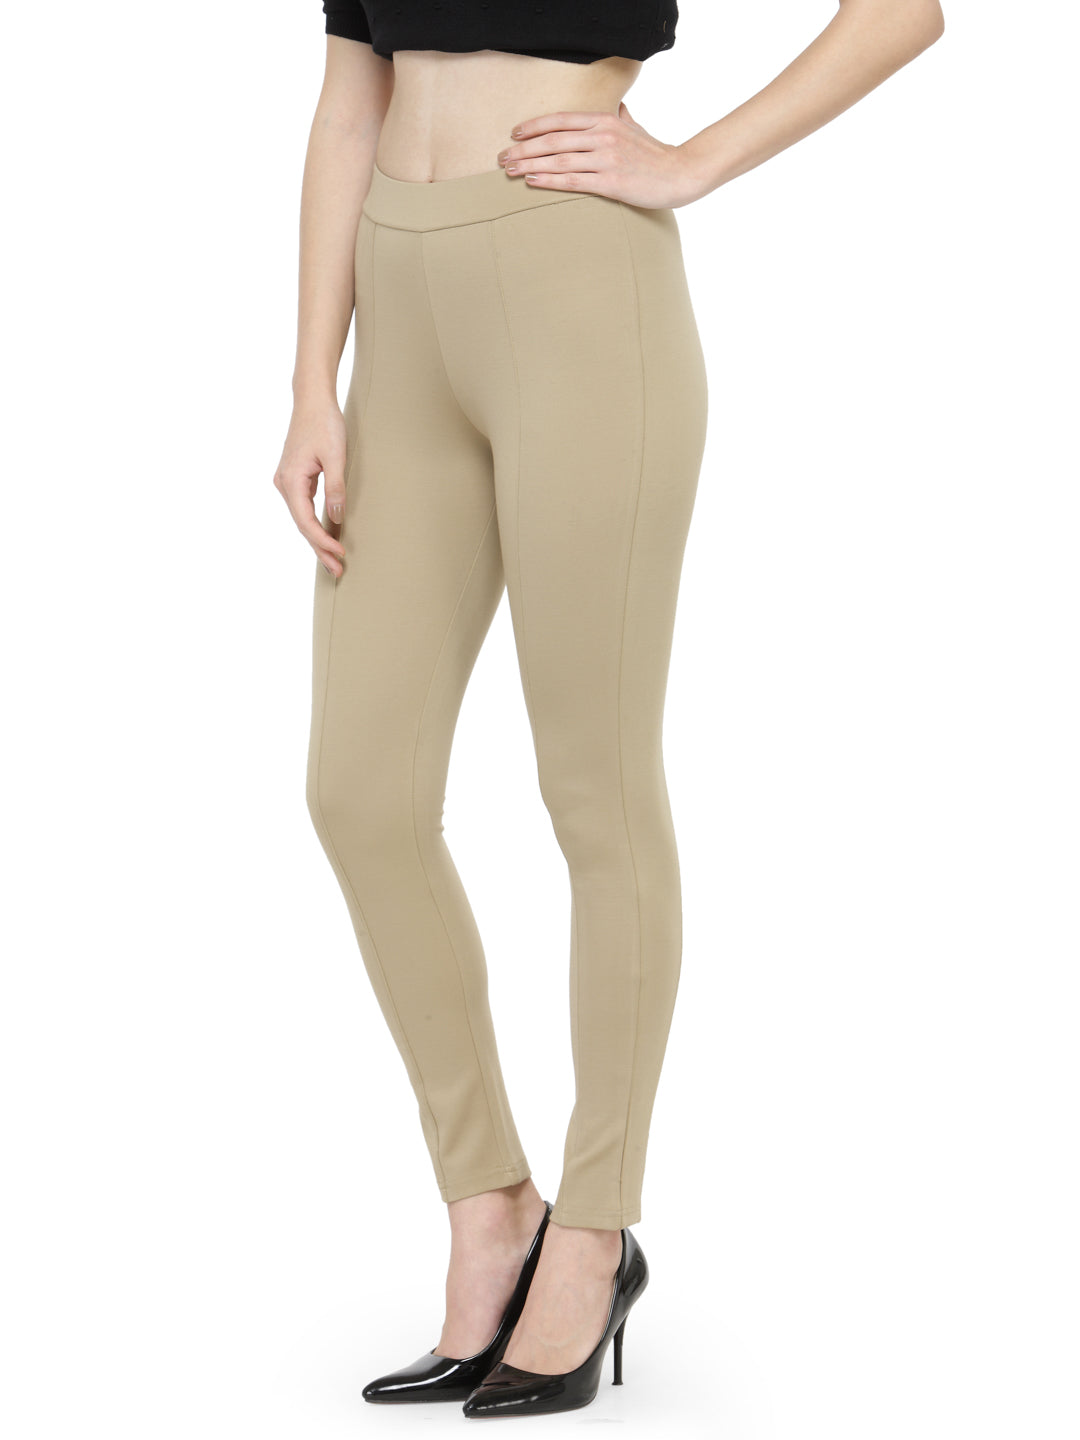 Gipsy Beige Casual Rayon Jegging